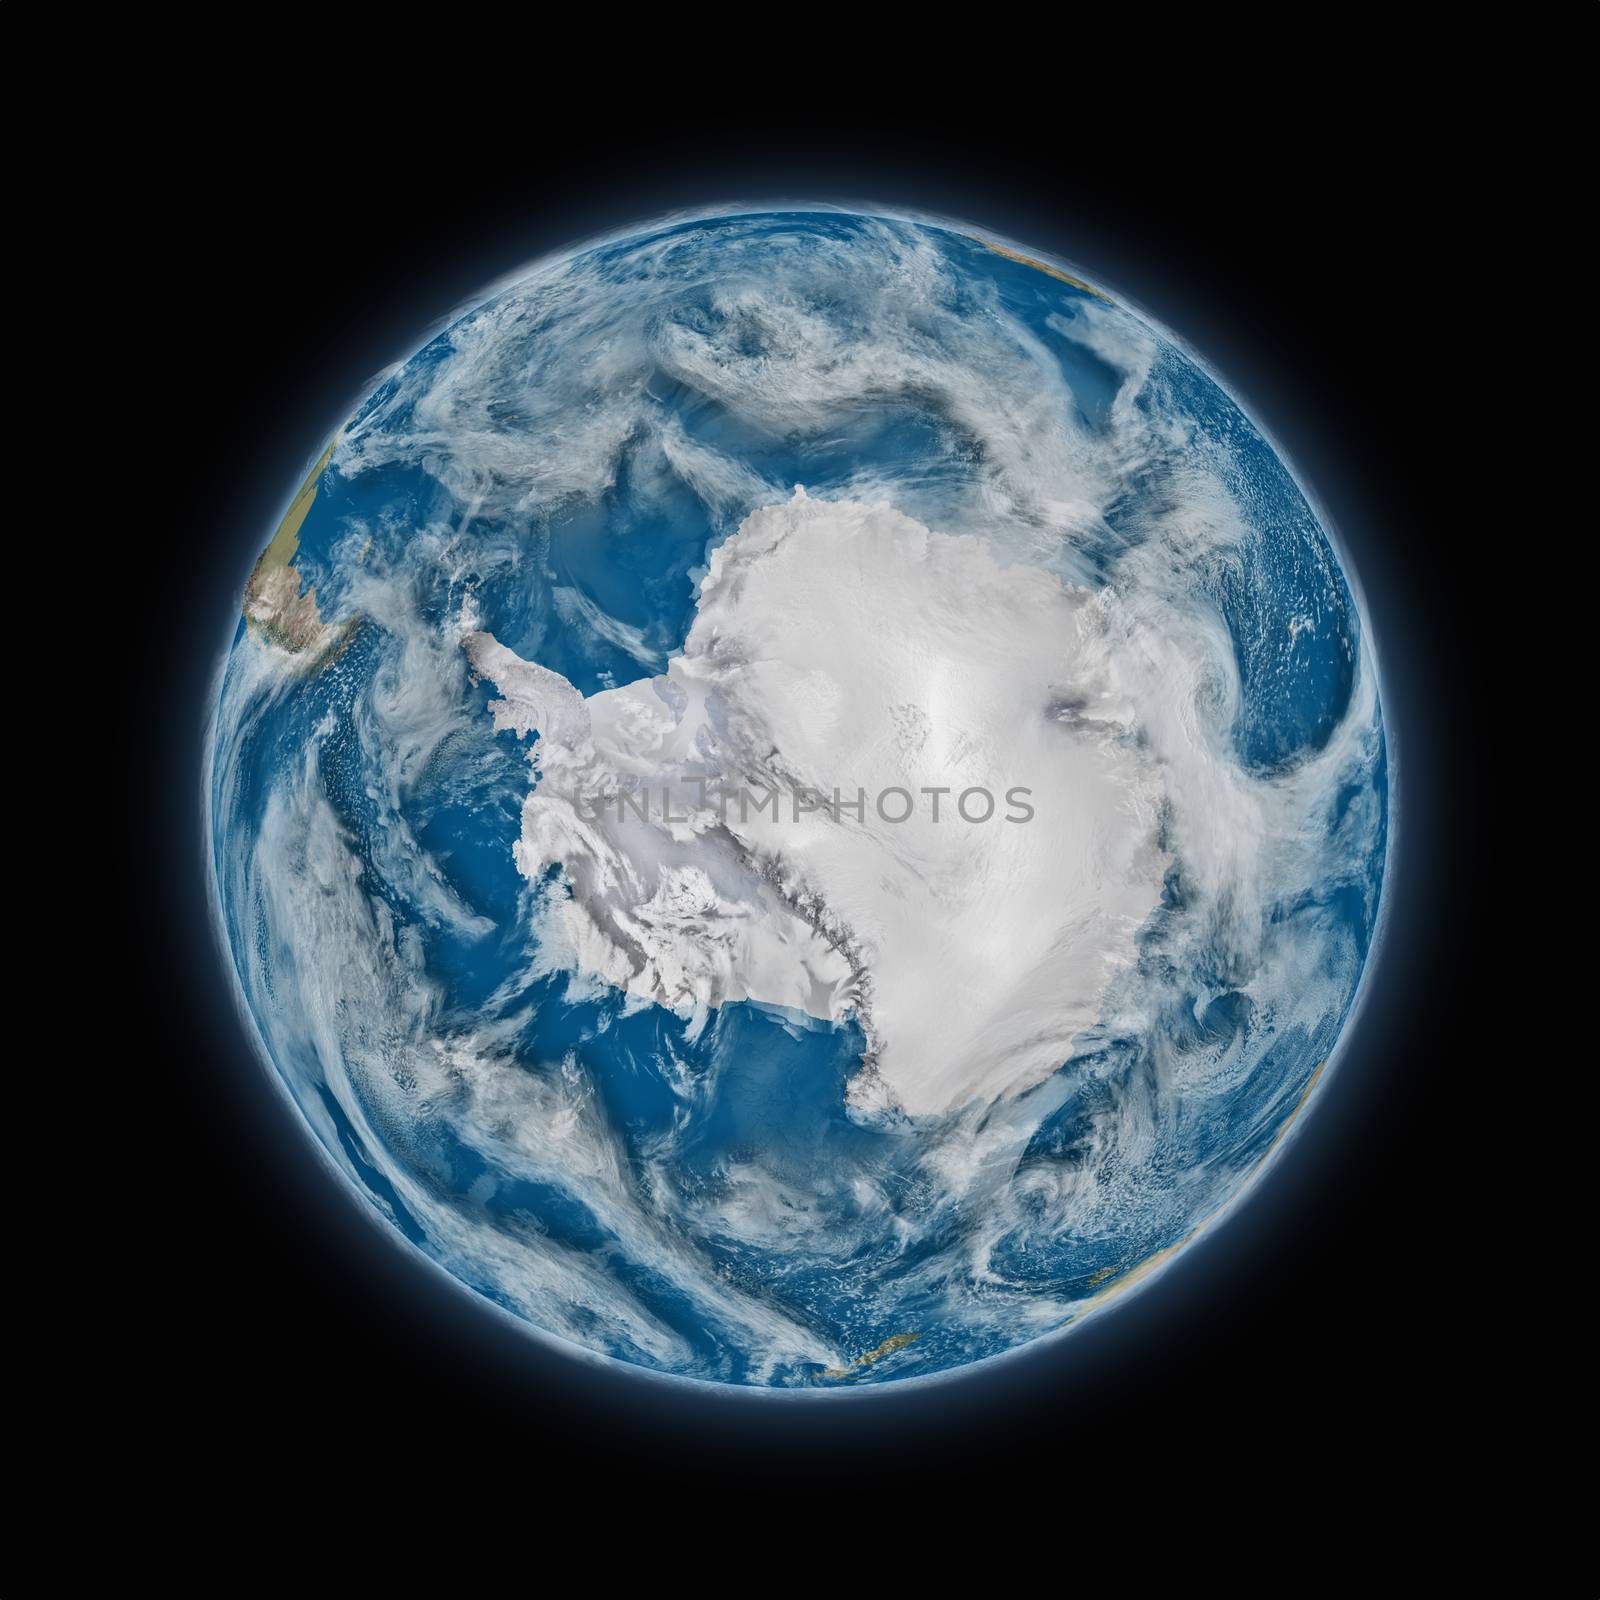 Antarctica on planet Earth by Harvepino